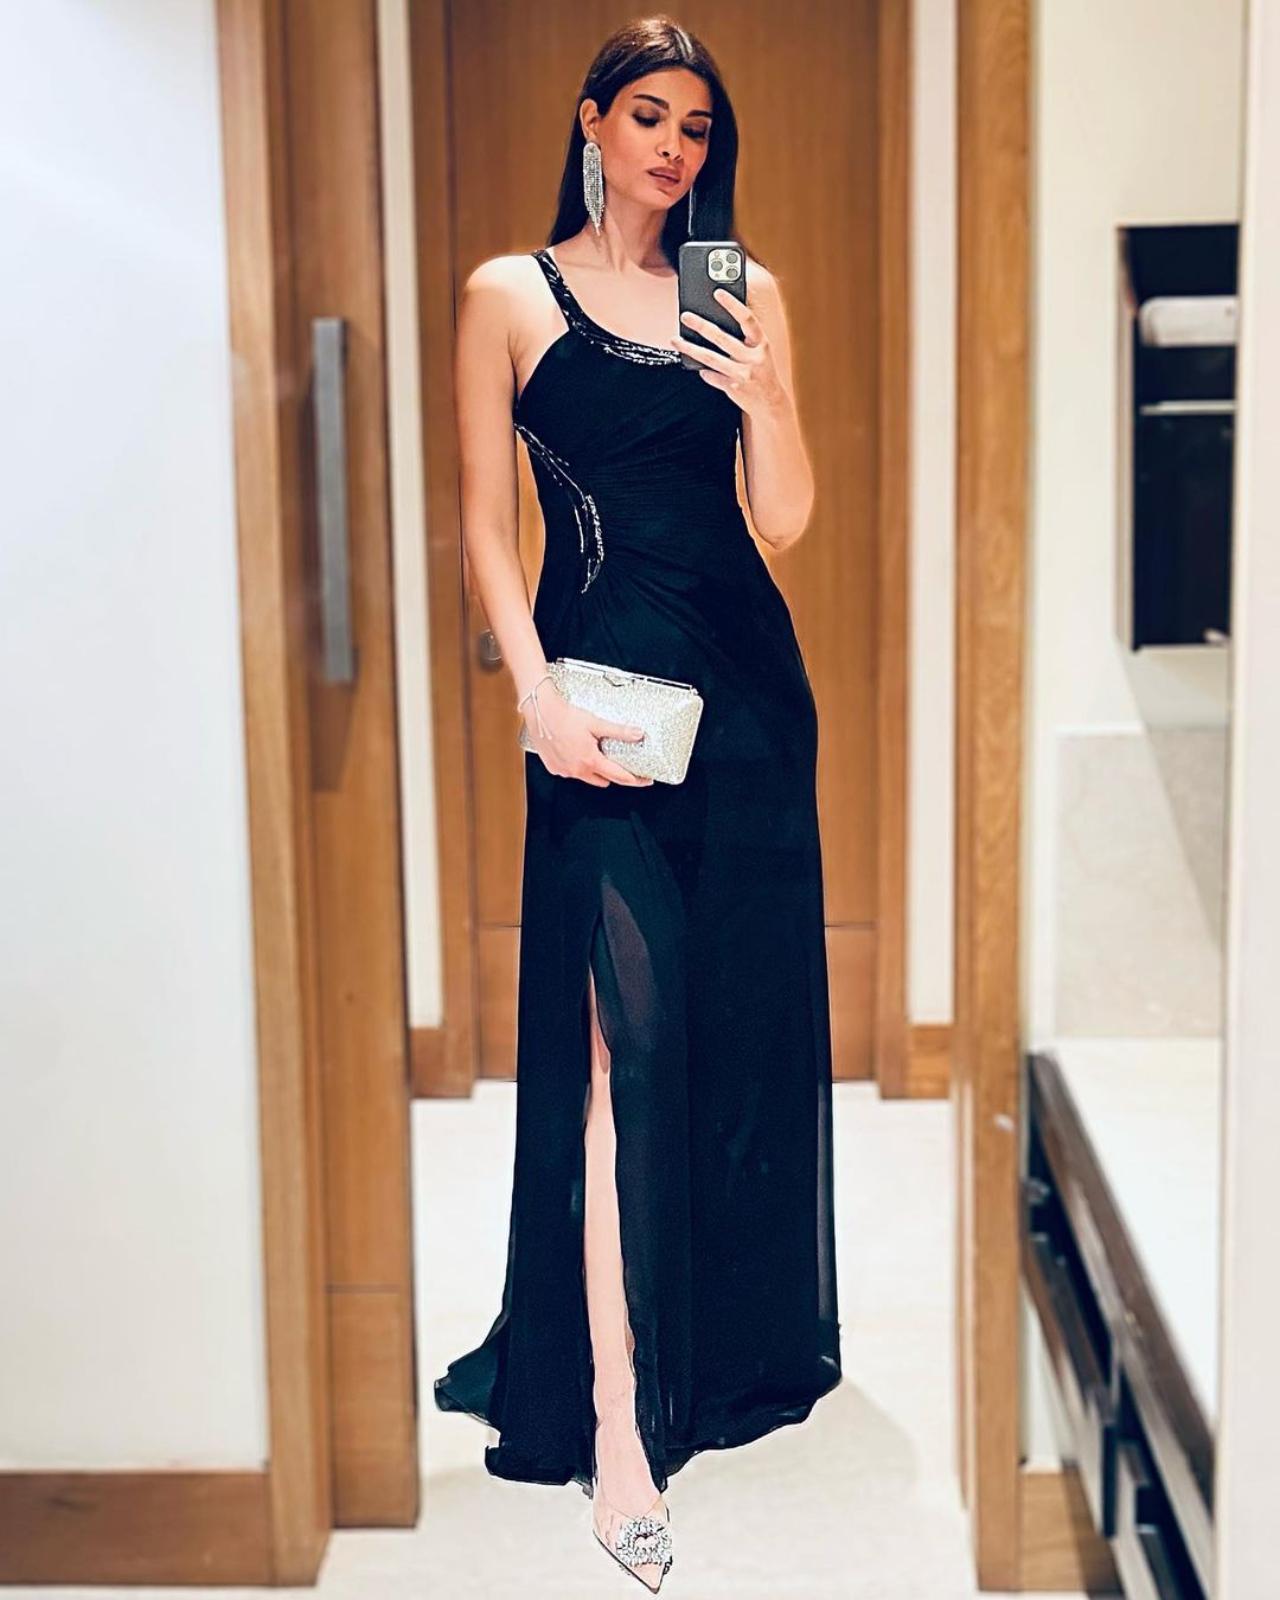 Looking for something classy and elegant. This thigh-high slit gown with silver detailing at the neckline and waist is the perfect minimalistic yet elegant look. Diana straightened her hair and opted for statement diamond earrings to go for the dress